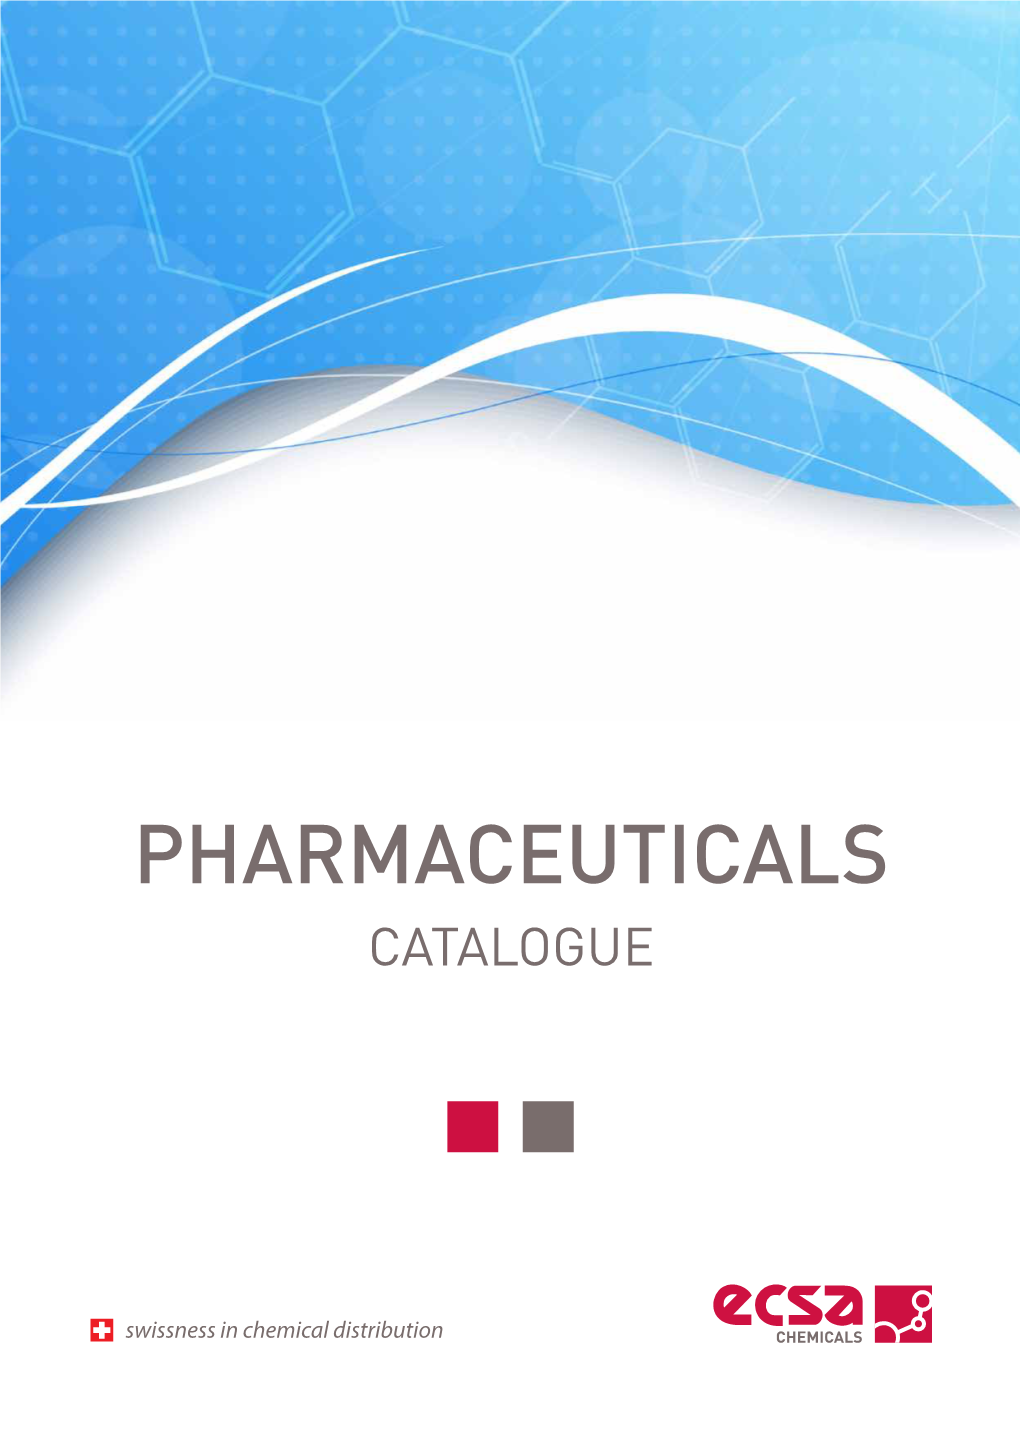 PHARMACEUTICALS CATALOGUE the ECSA Group Is a Fourth Generation Family Firm